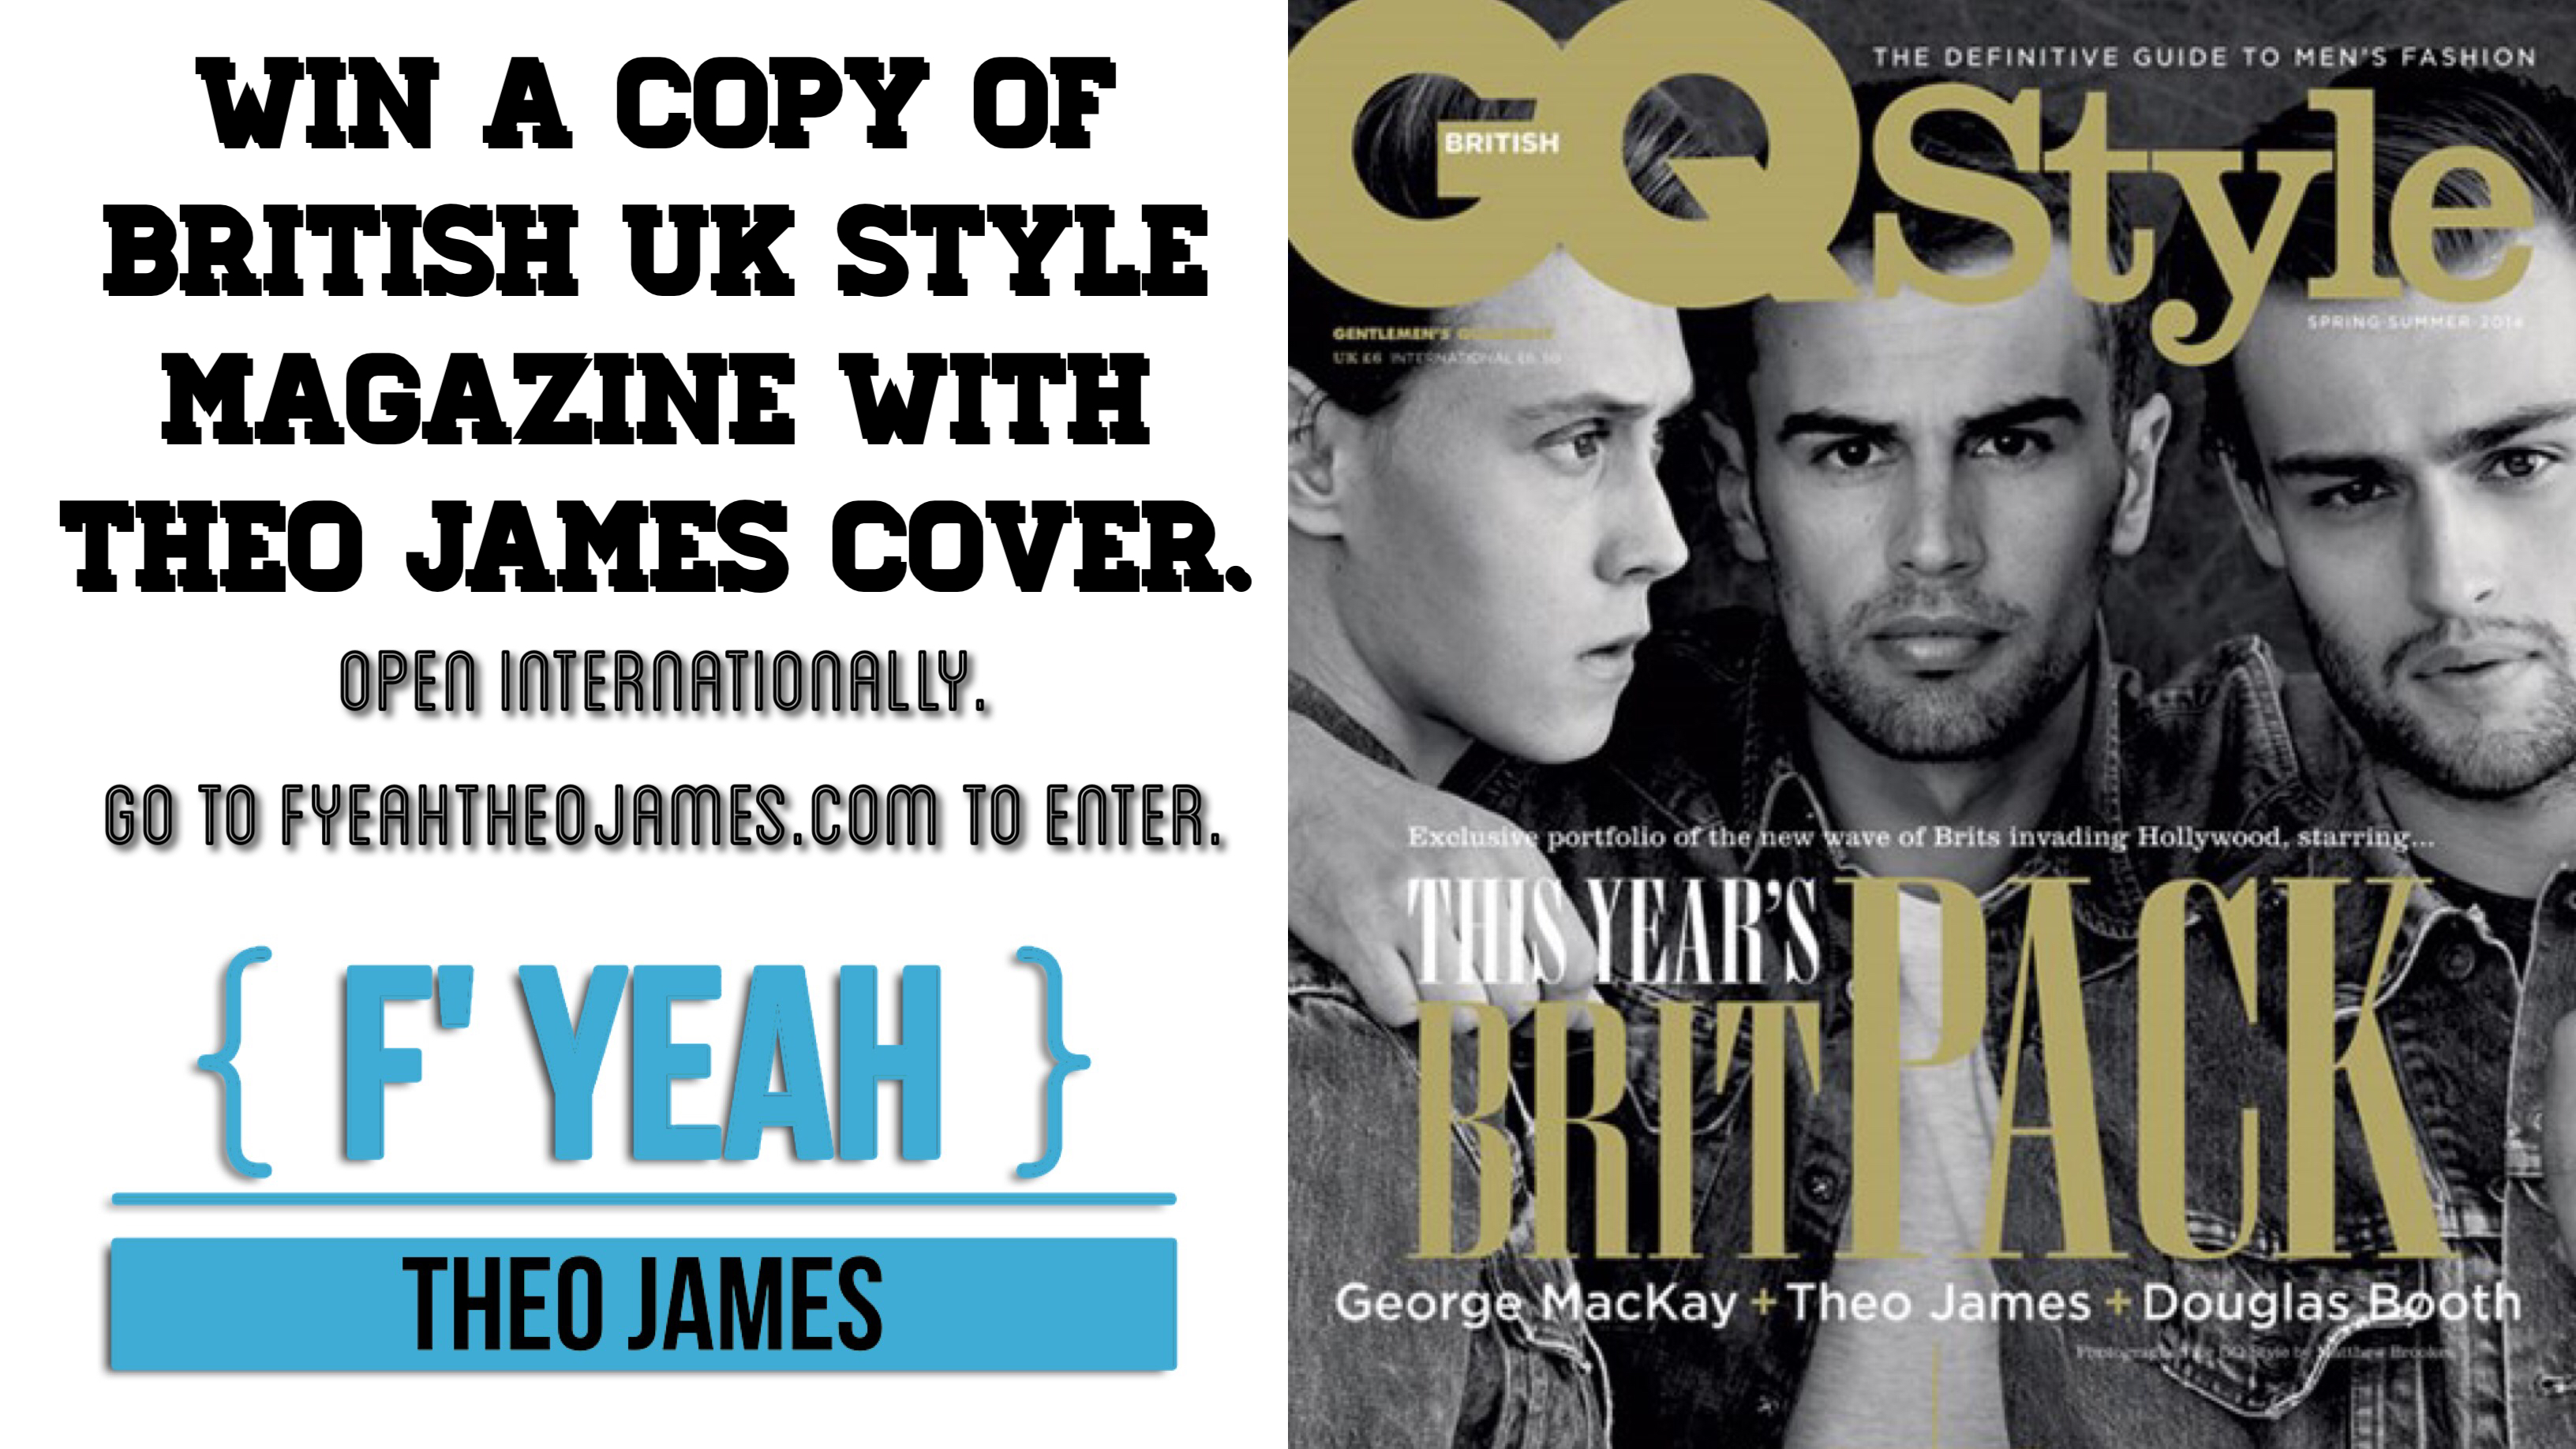 INTERNATIONAL GIVEAWAY: Win a copy of British GQ Style with Theo James Cover